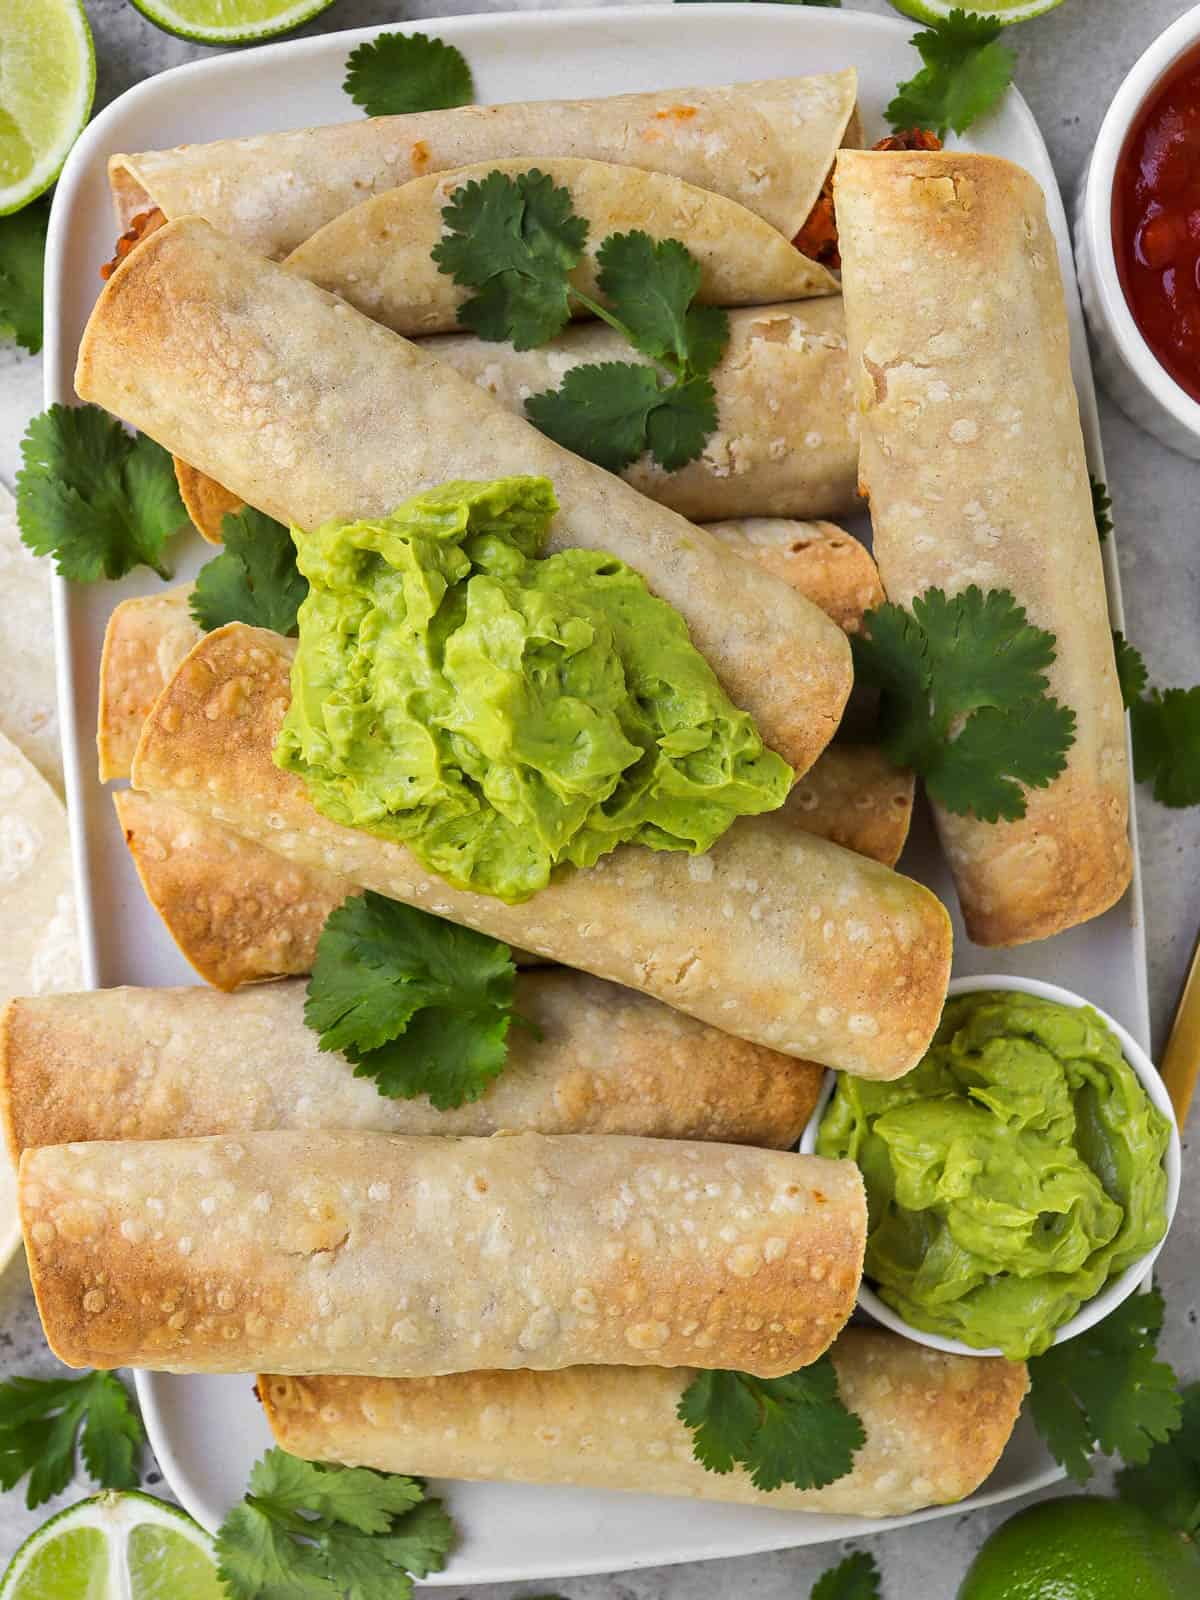 Taquitos on platter topped with coriander leaves and guacamole. Fresh cut up limes, tortillas, salsa and gold spoon on the sides.